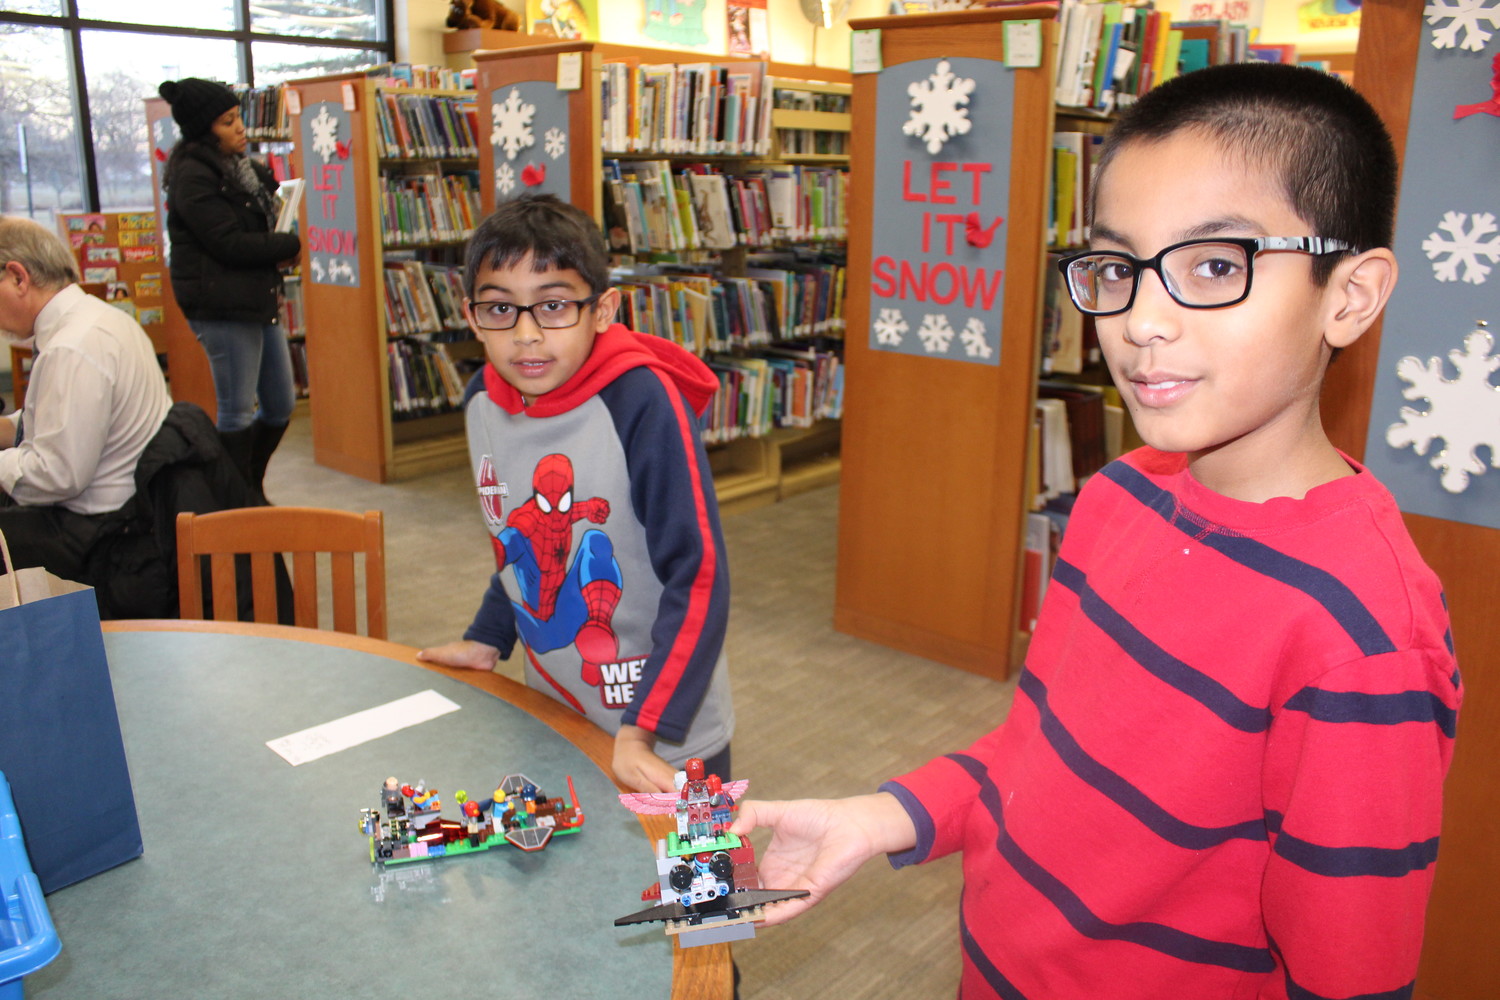 Rajiv and Sanjeev Singh made battleships out of LEGOs for the Henry Waldinger Memorial Library’s 21st Annual Children’s LEGO Exhibit.